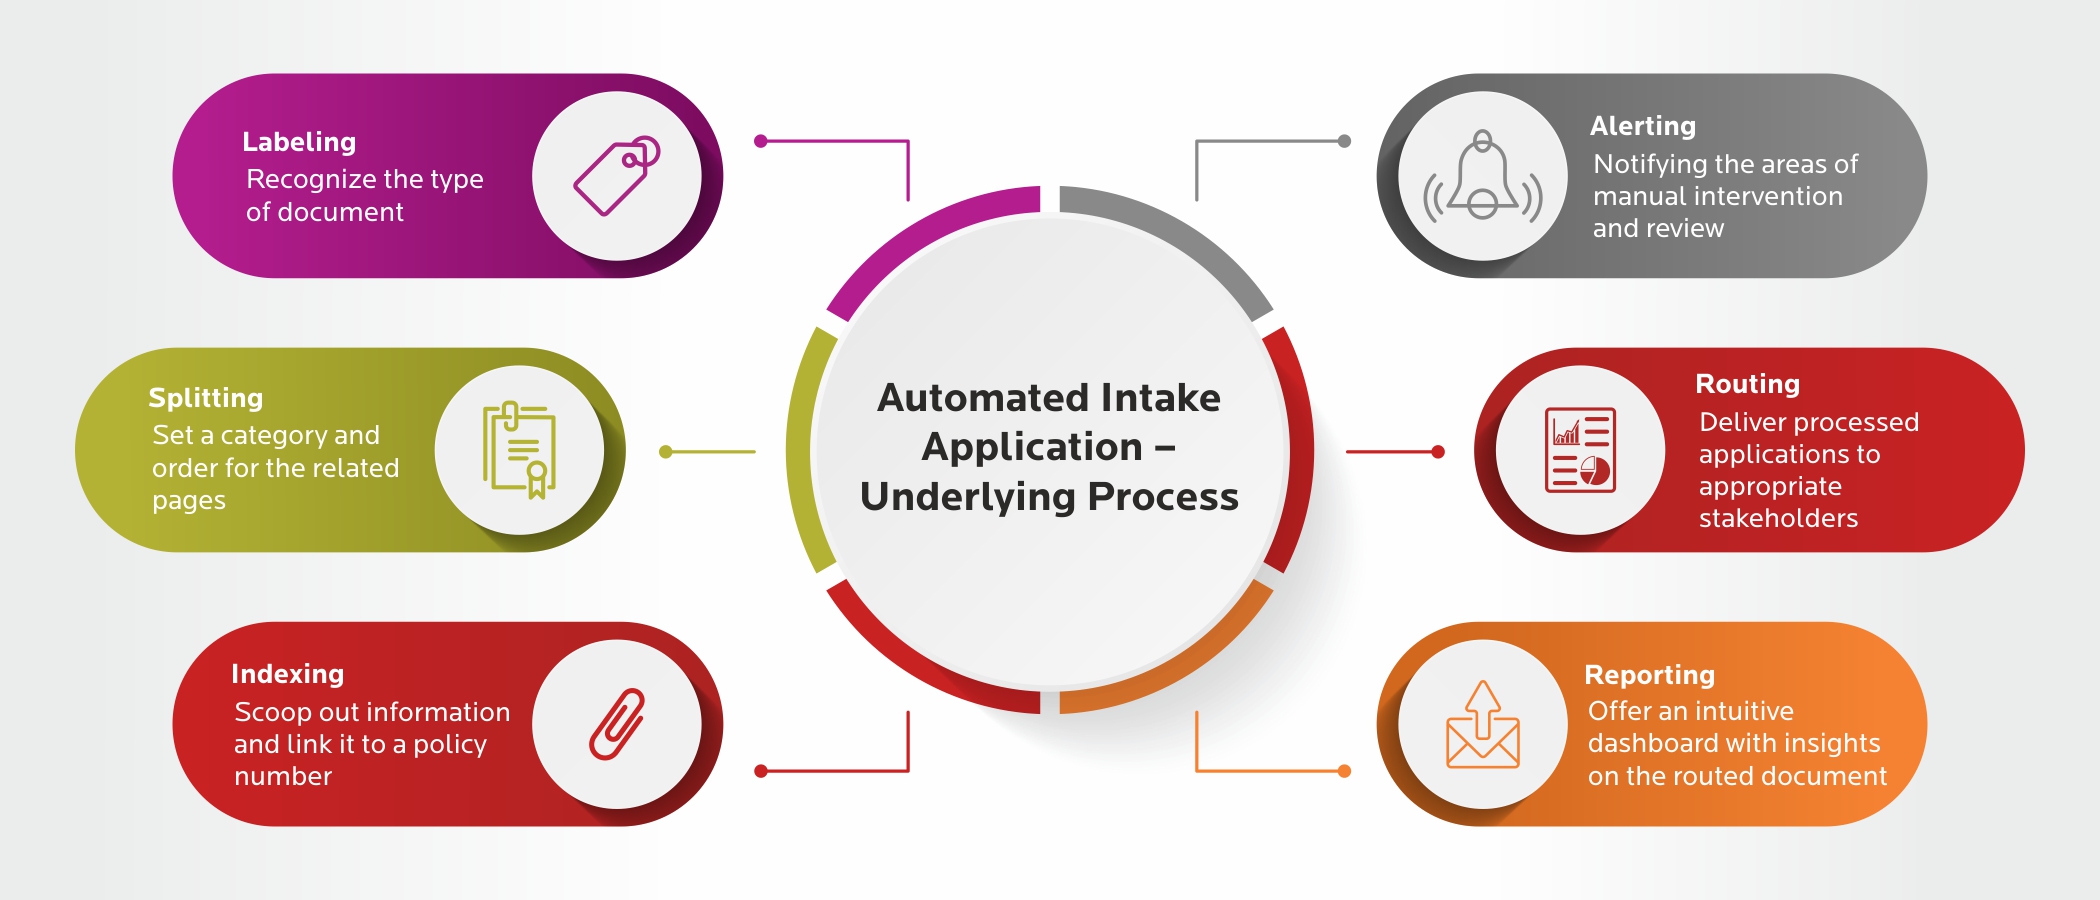 Automated Intake Application – Underlying Process